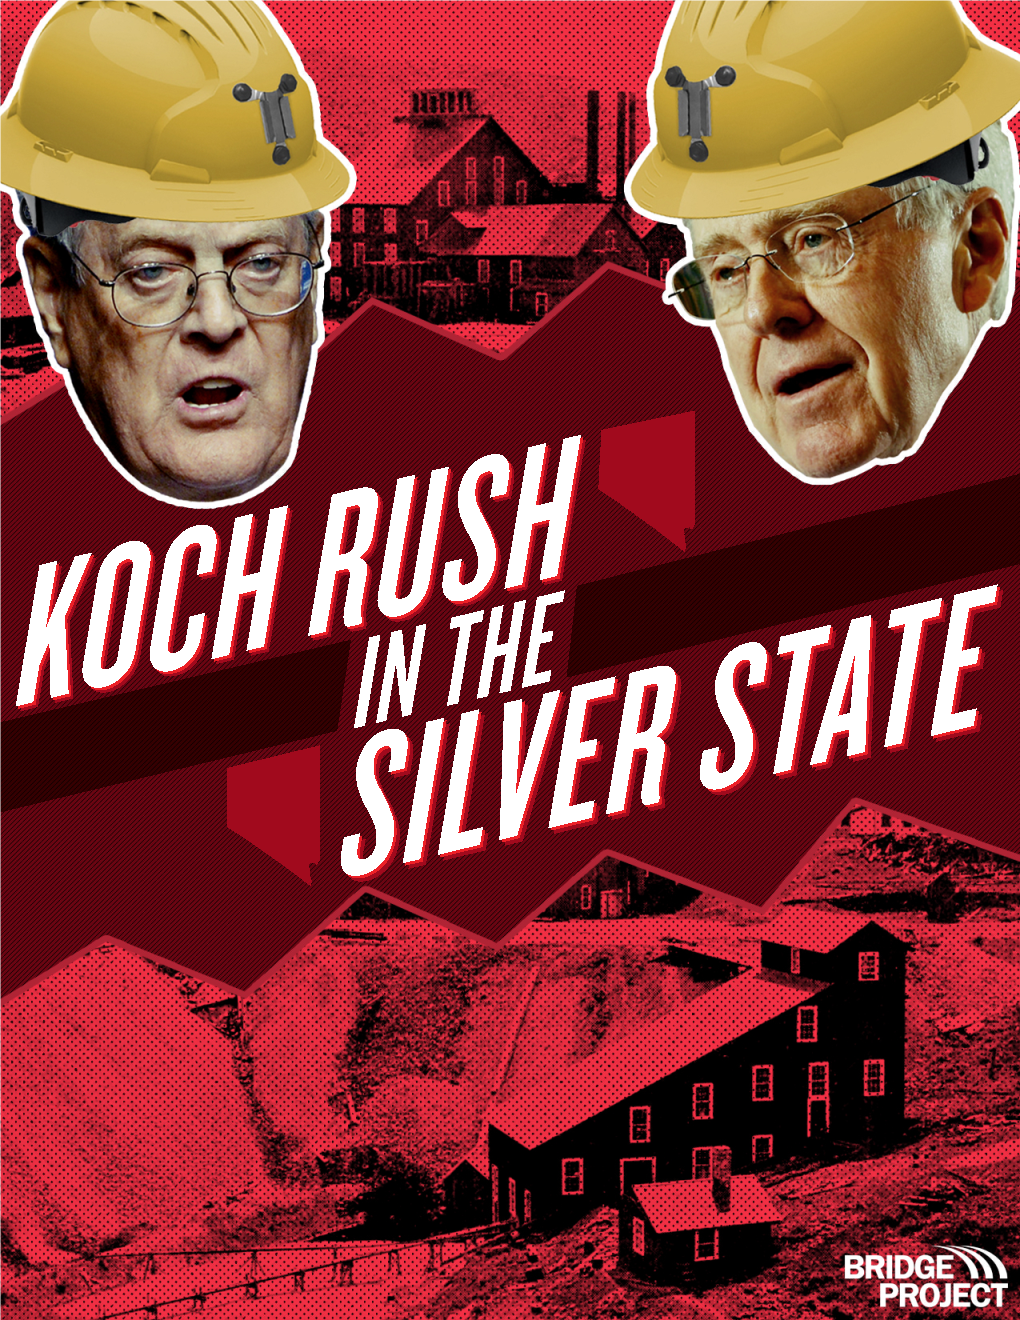 Koch Industries Has Assets in Nevada, Drawn to the State by Natural Resources and Favorable Tax Policies